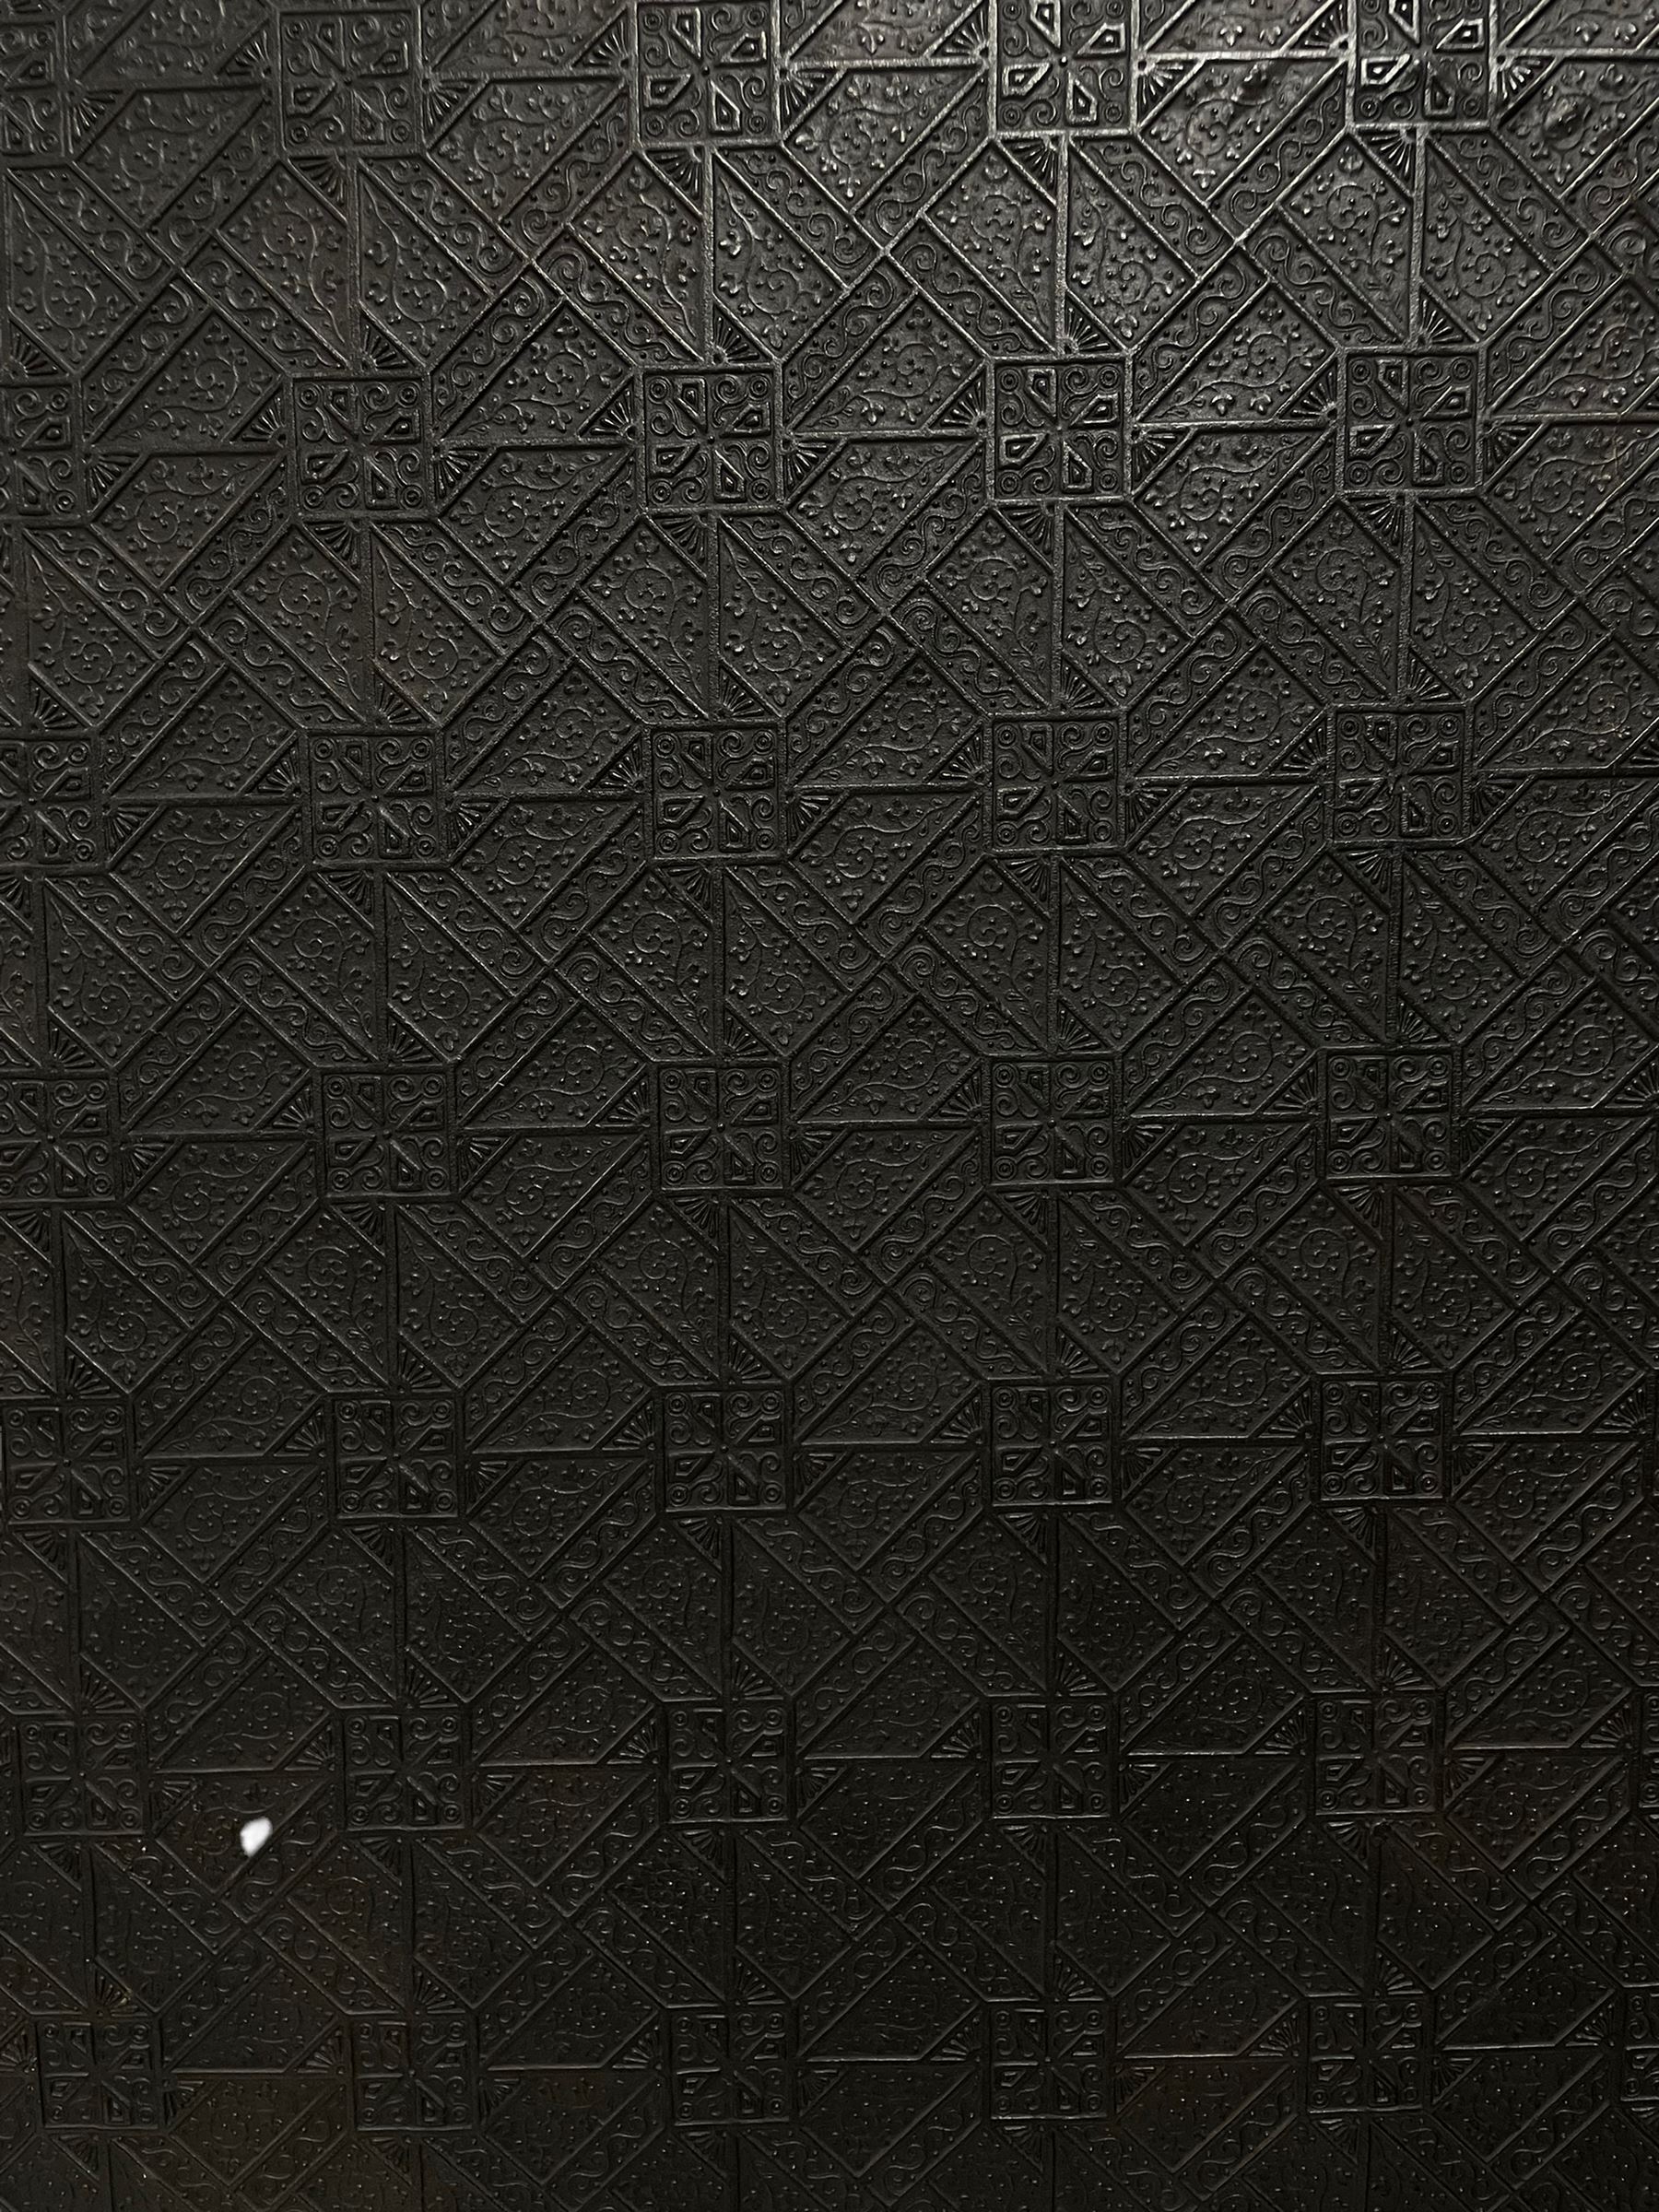 Late 19th century Aesthetic Movement screen or room divider - Image 15 of 17